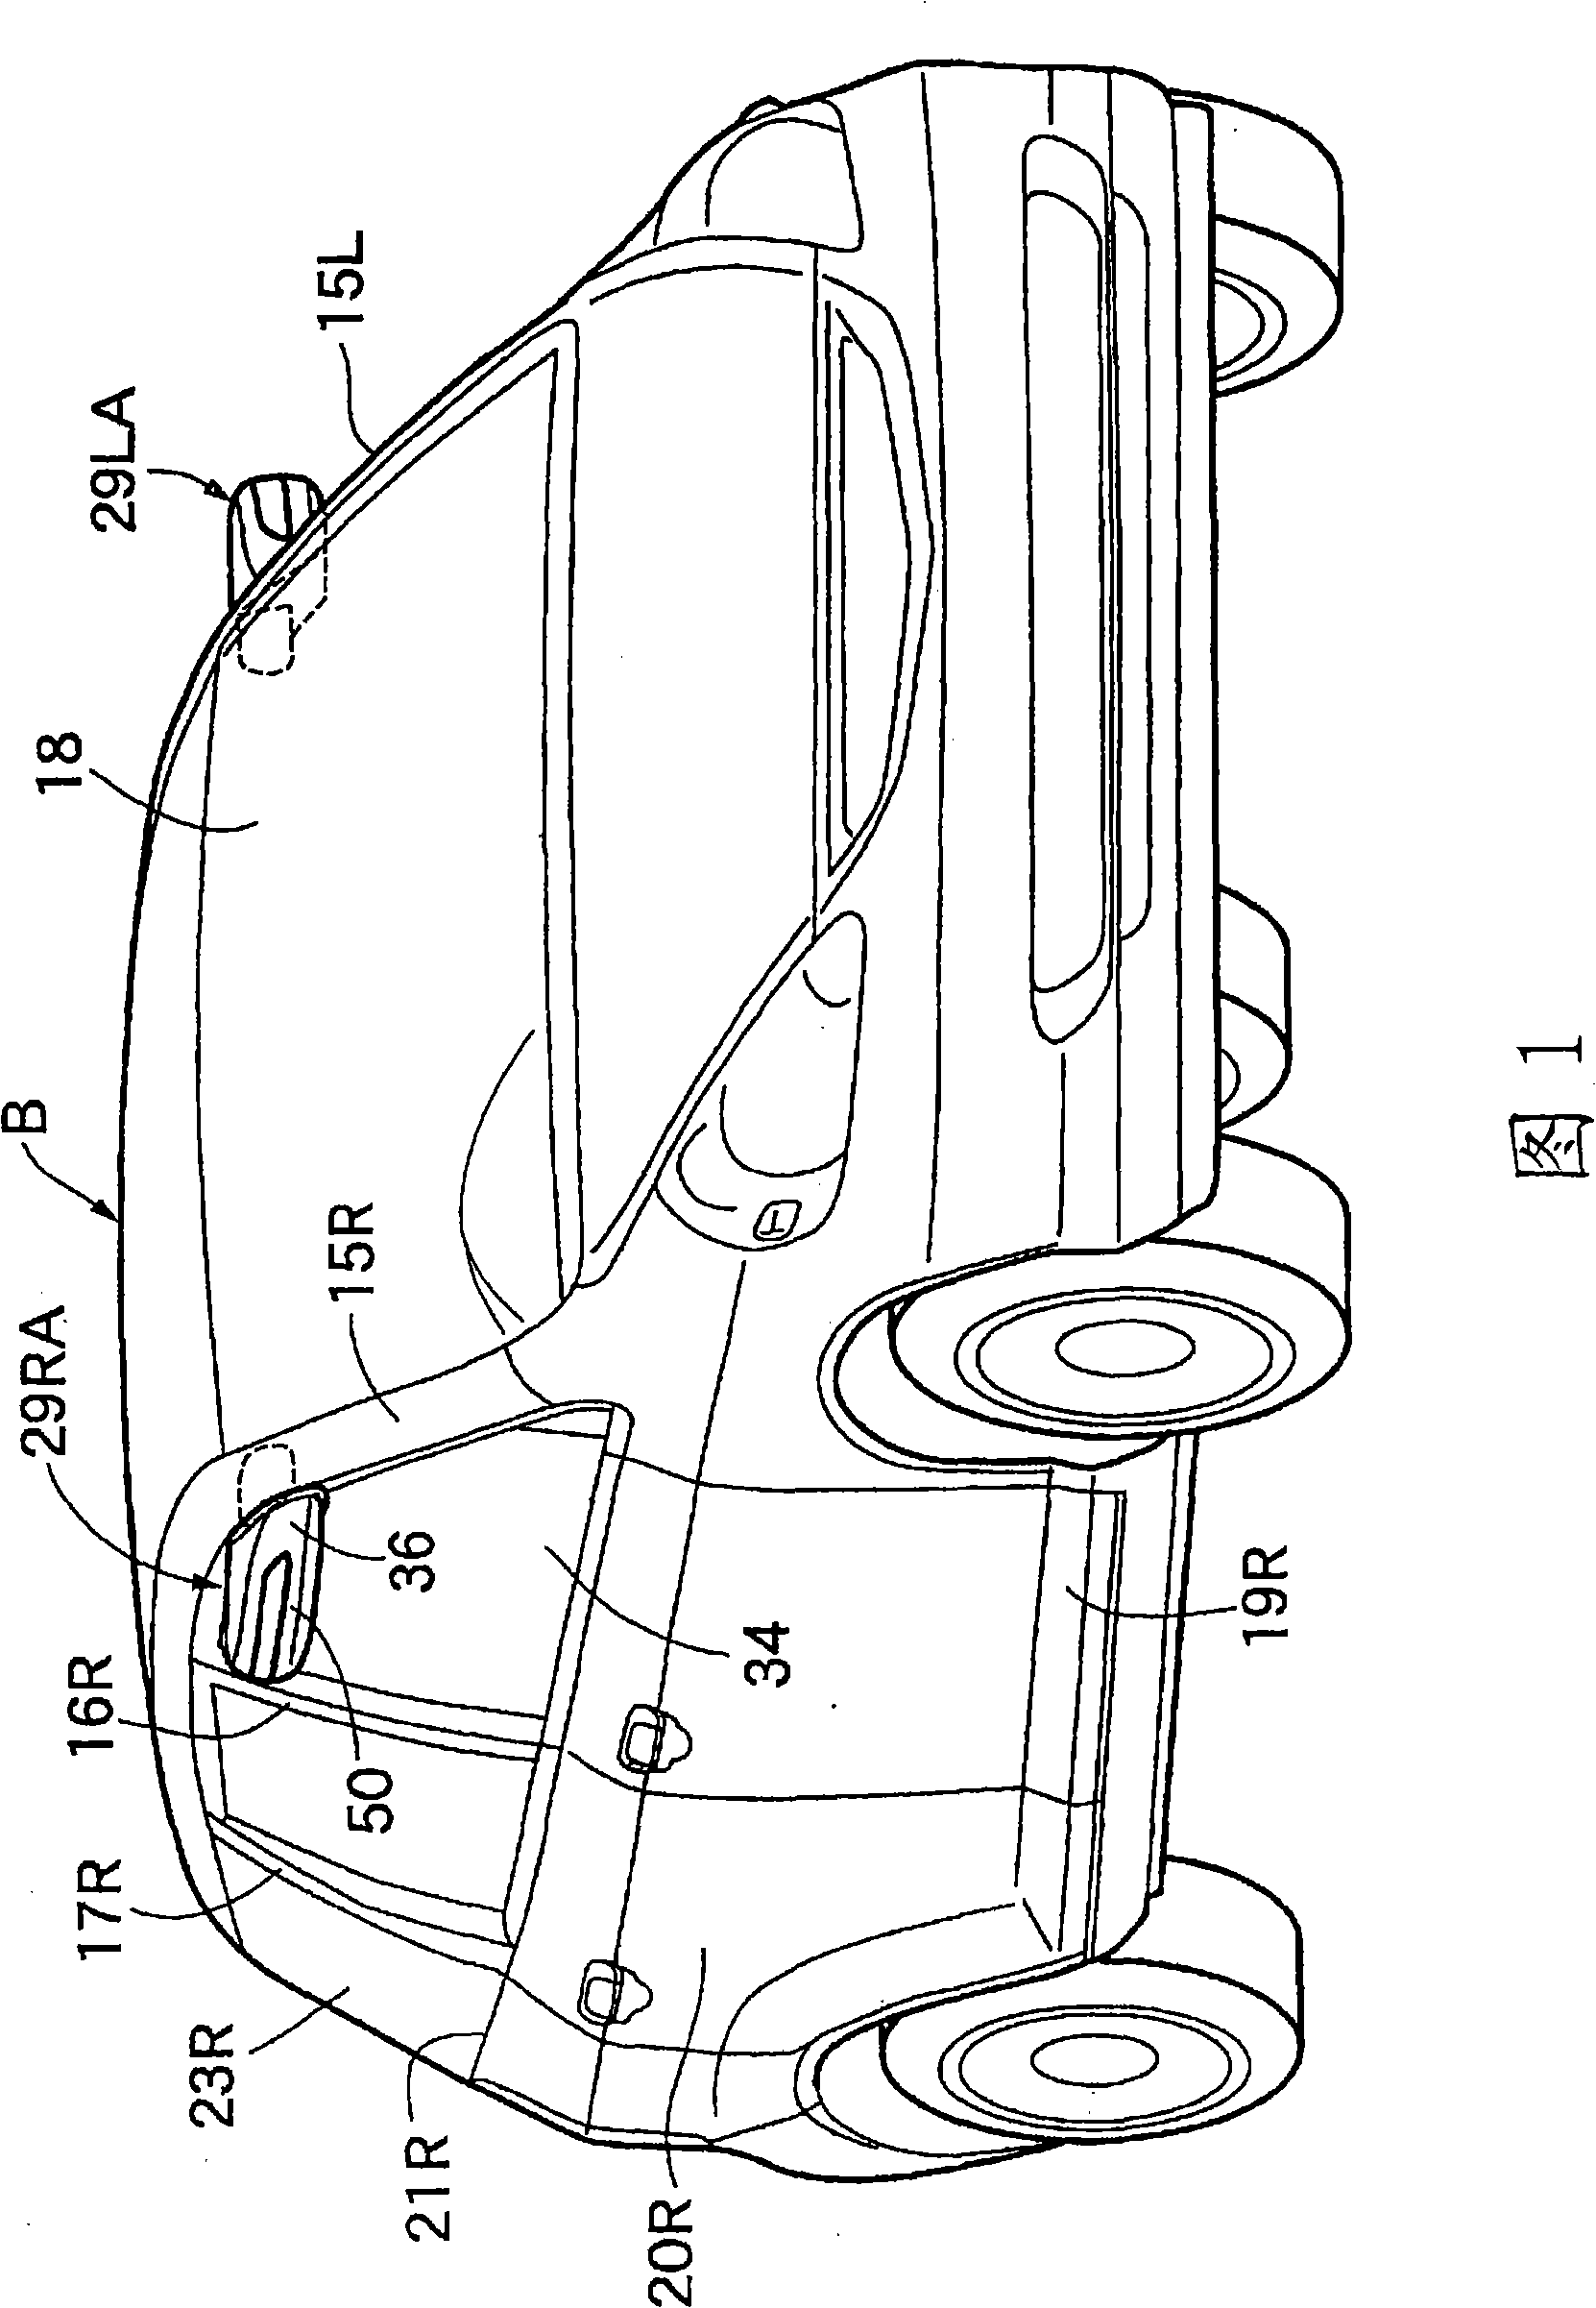 Integrated mirror device for vehicle